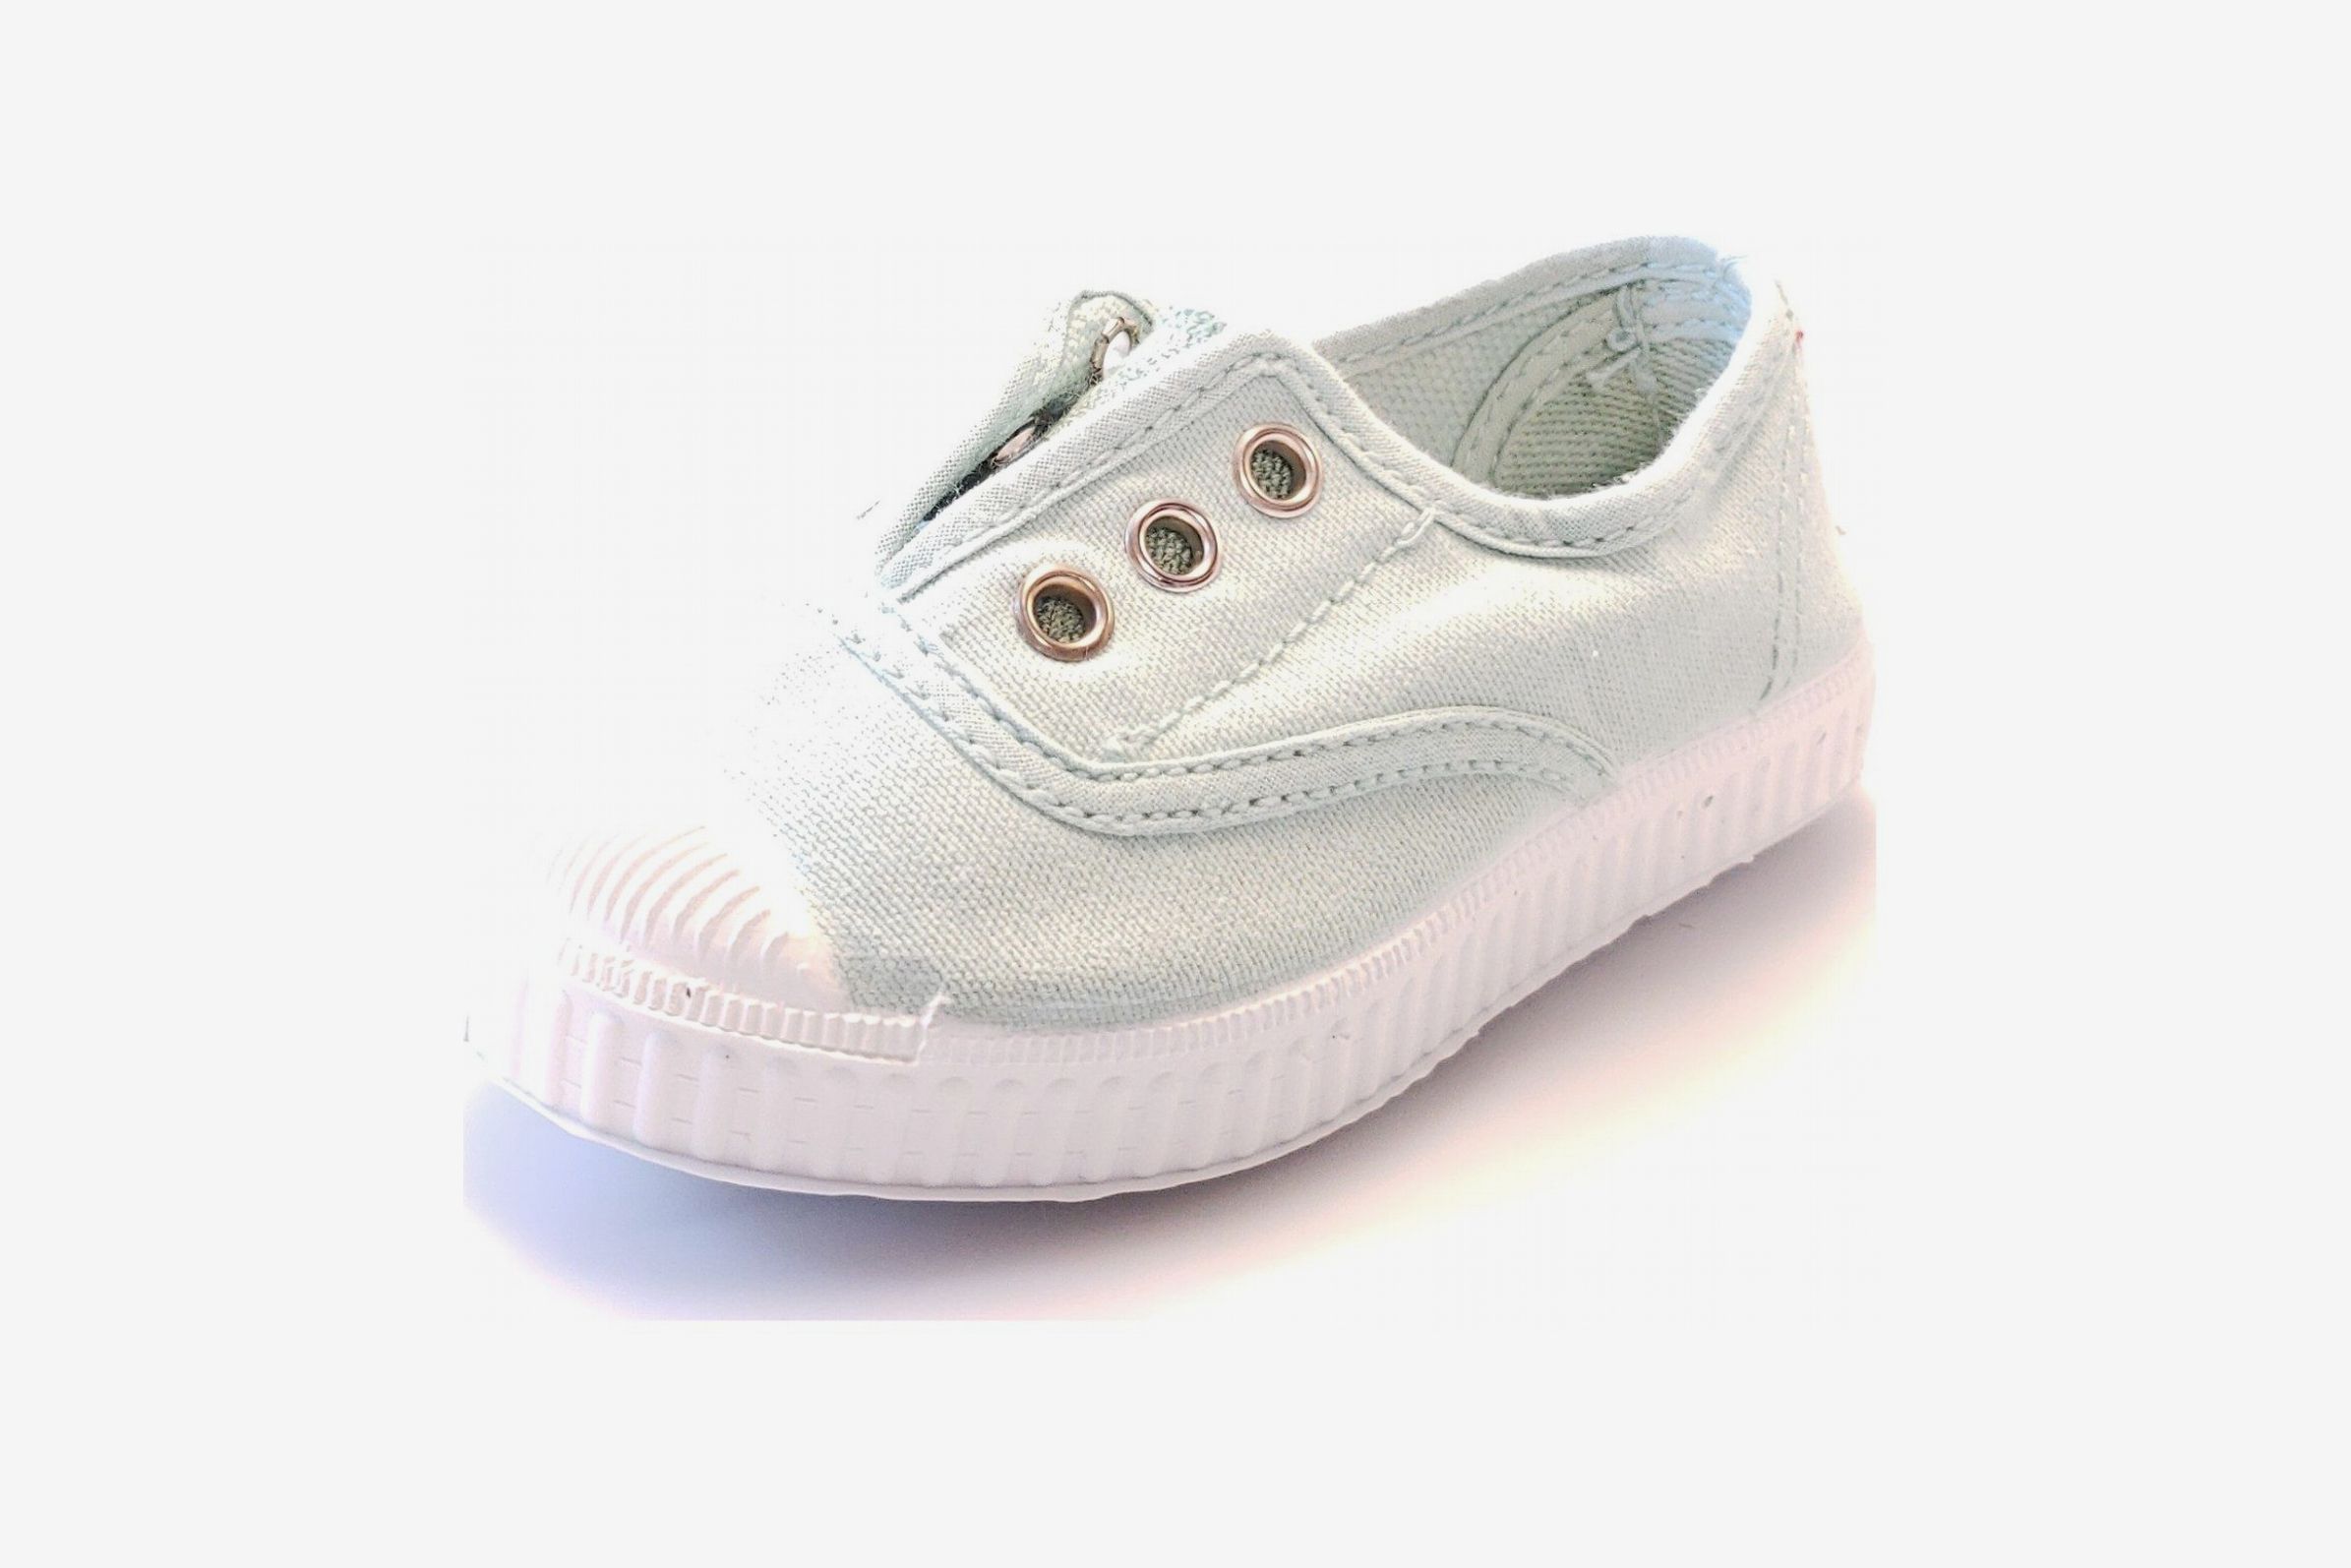 KaMiao Cute Toddler Flat Canvas Light Weight Laceless Slip-on Sneakers Walking Tennis Shoes School Shoes 